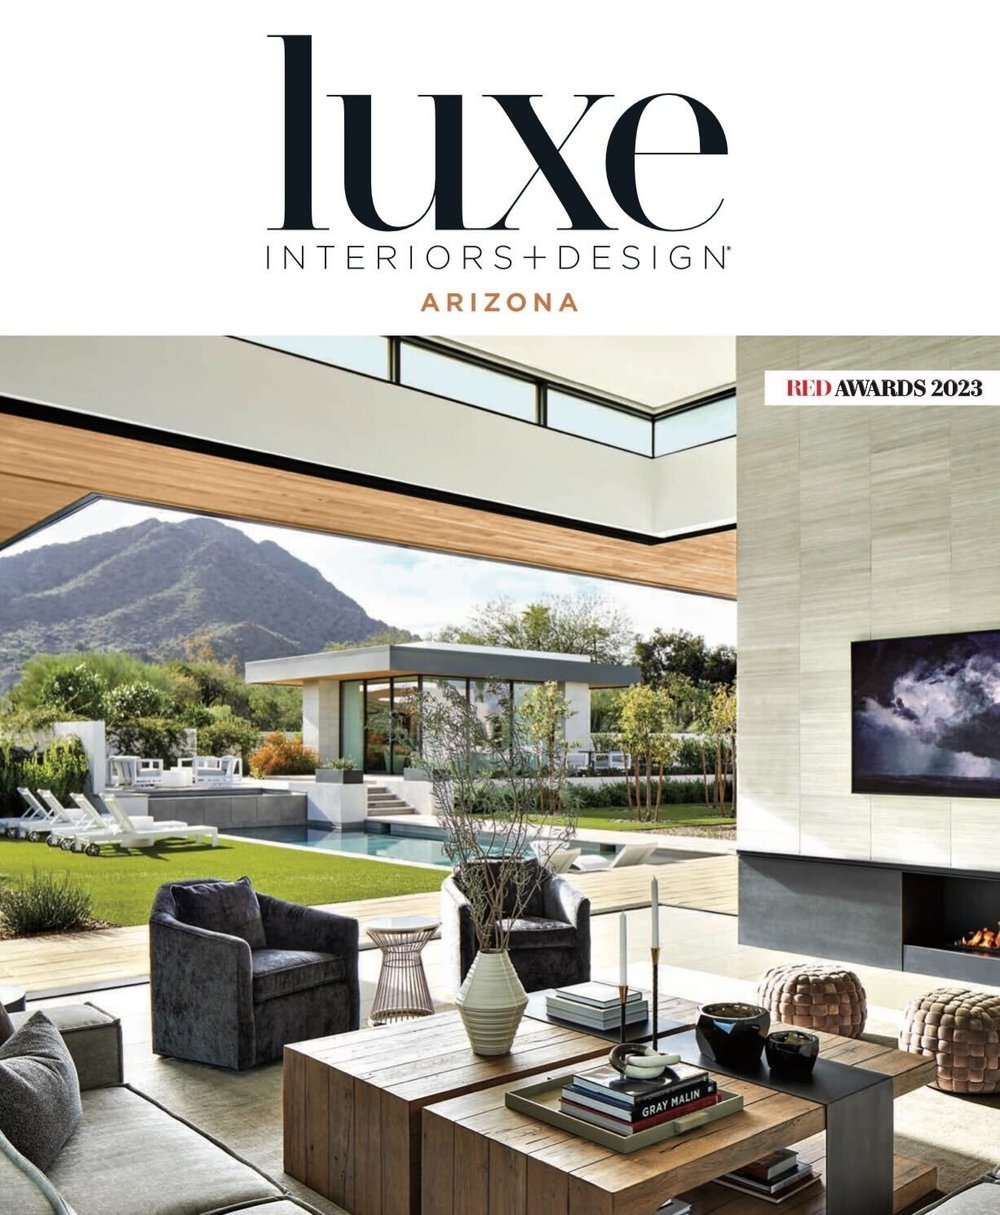  Snippet from “Luxe Interiors + Design” magazine featuring an open concept living space with large sliding patio doors opening to a spacious patio with pool and casita. 